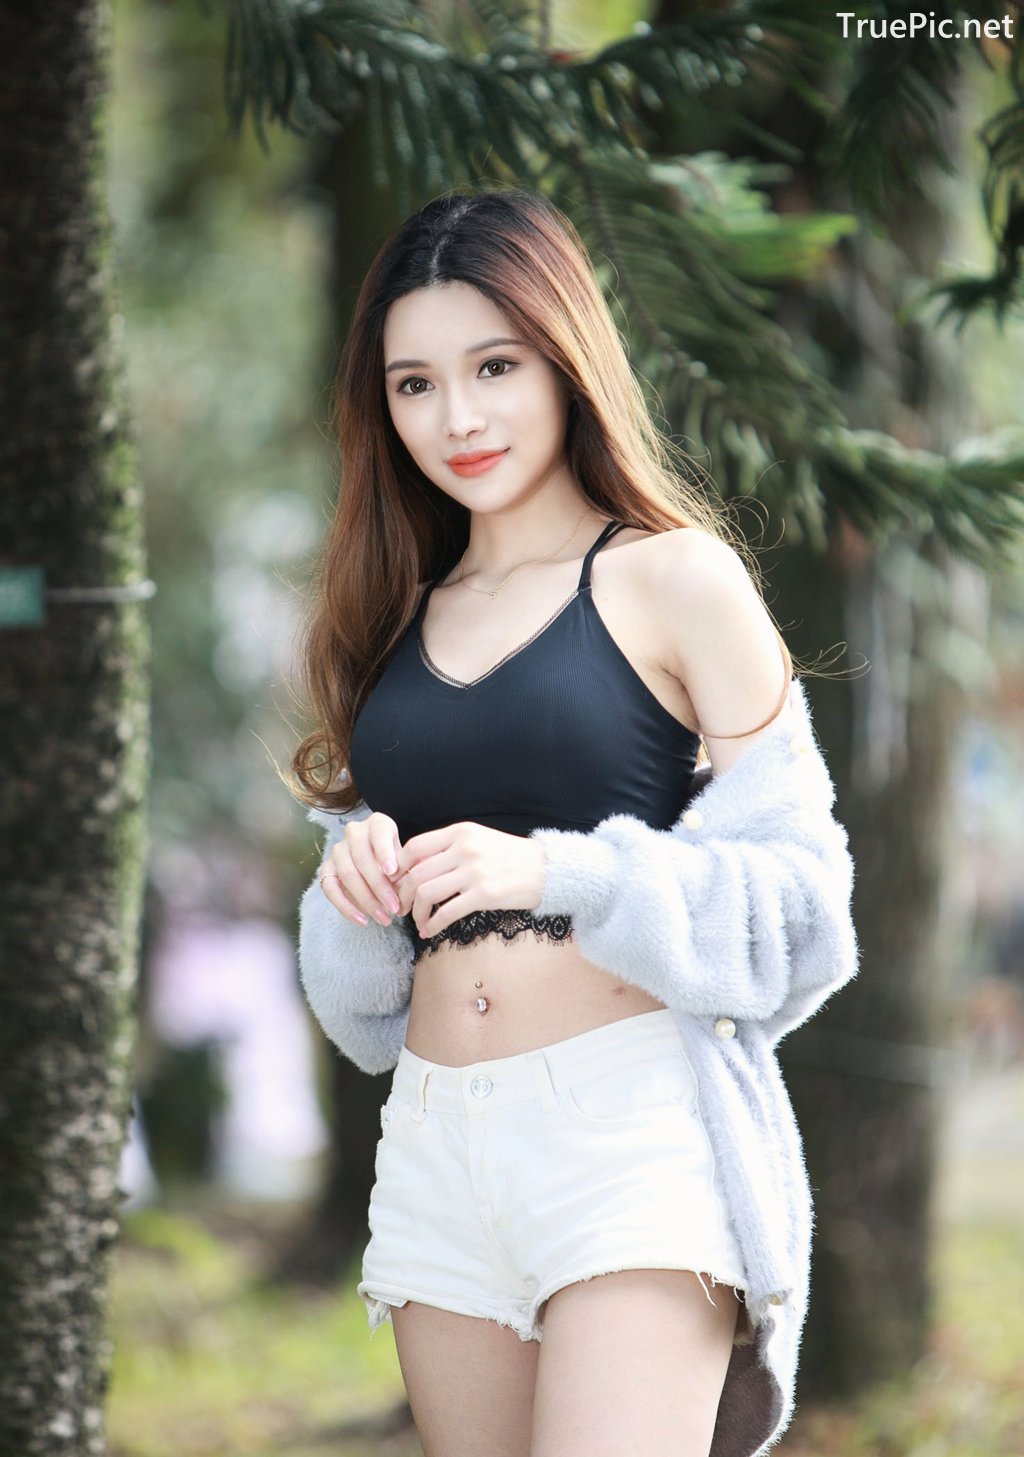 Image-Taiwanese-Model–莊舒潔–Hot-White-Short-Pants-and-Black-Crop-Top-TruePic.net- Picture-3